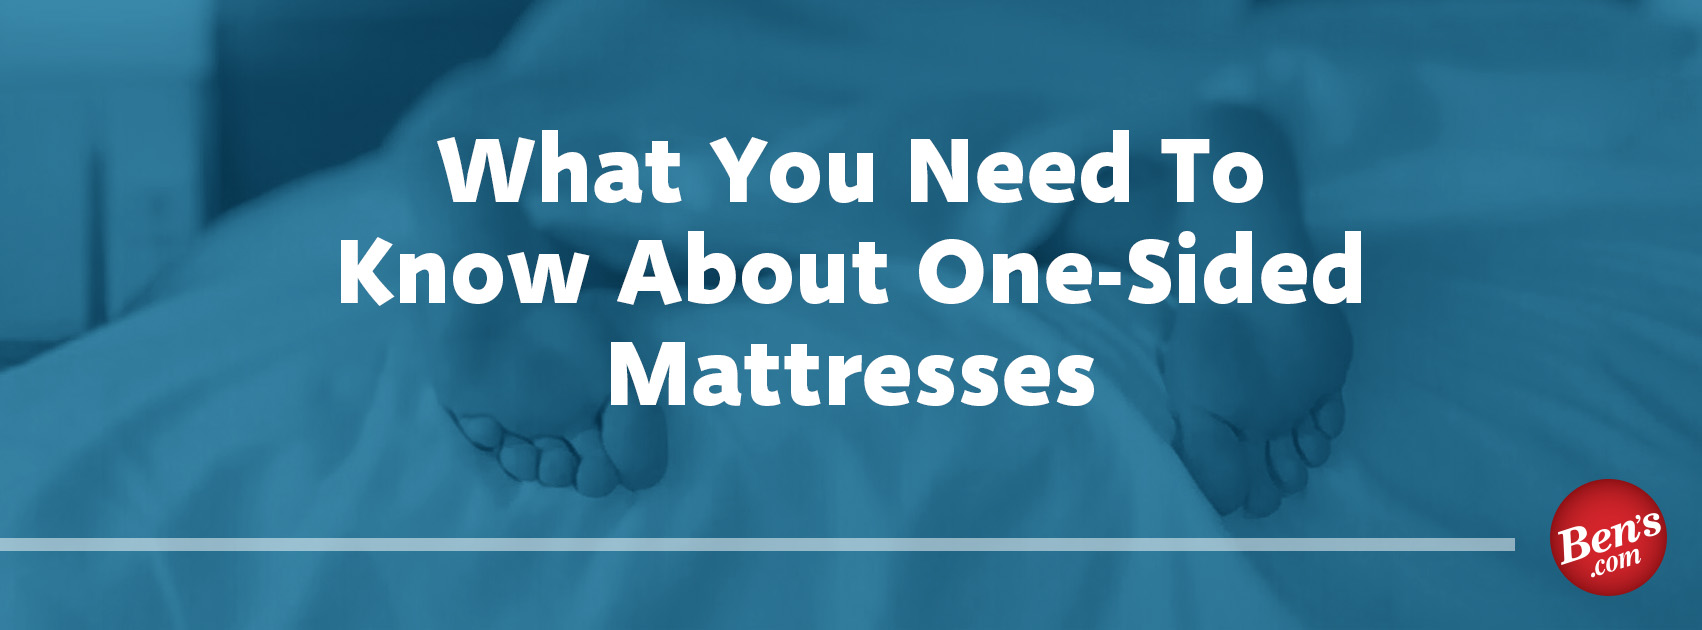 October-1-_-What-You-Need-To-Know-About-One-Sided-Mattresses